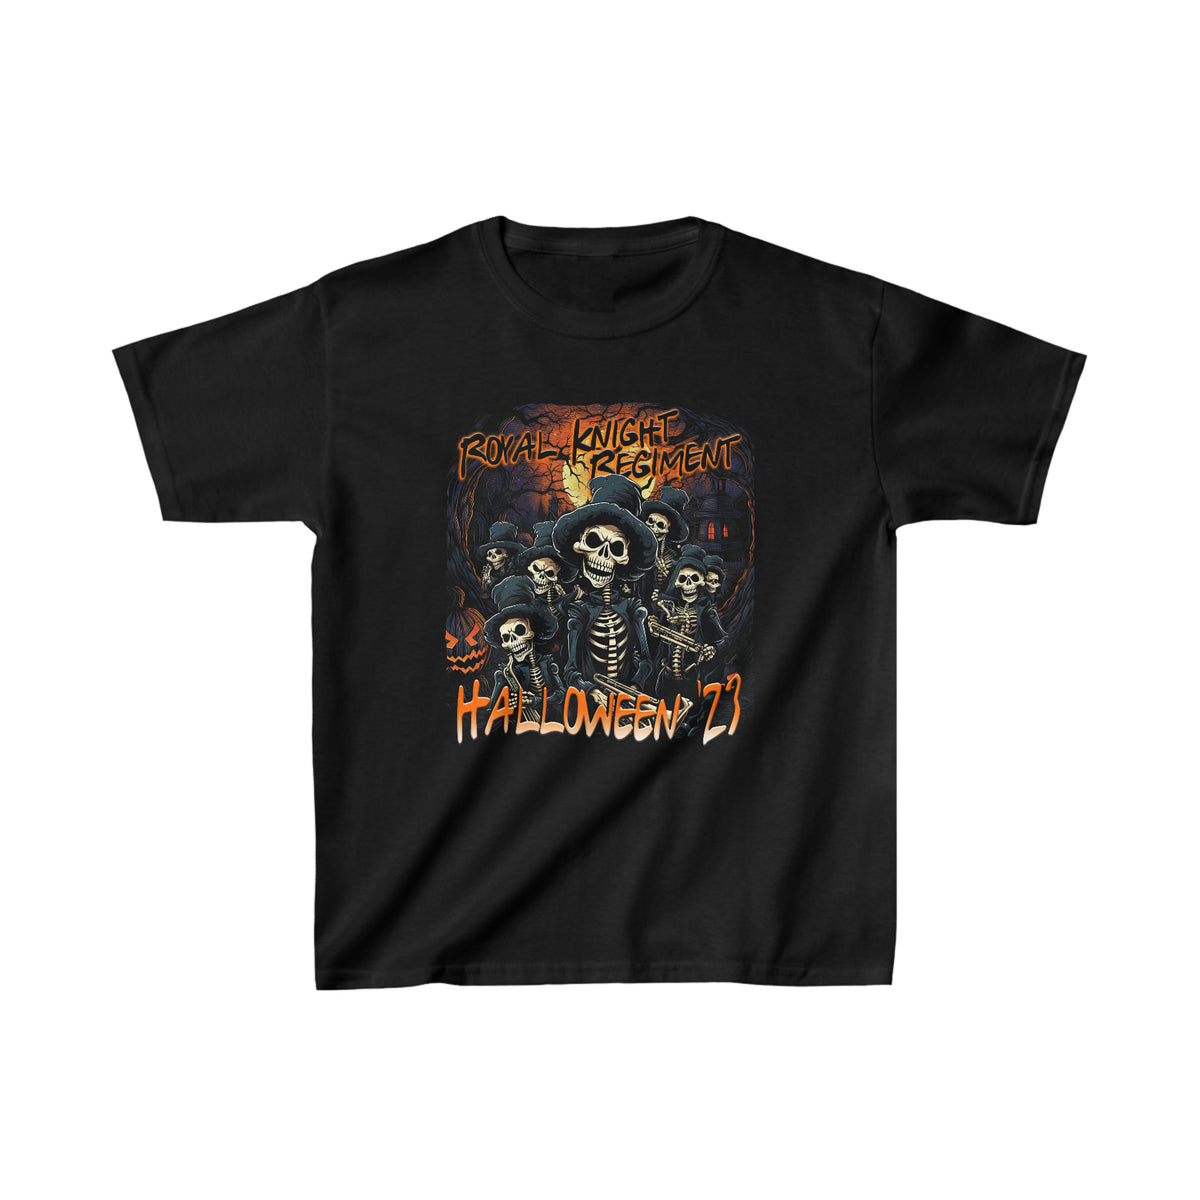 Exclusive Royal Knight Regiment Halloween Youth T-Shirt